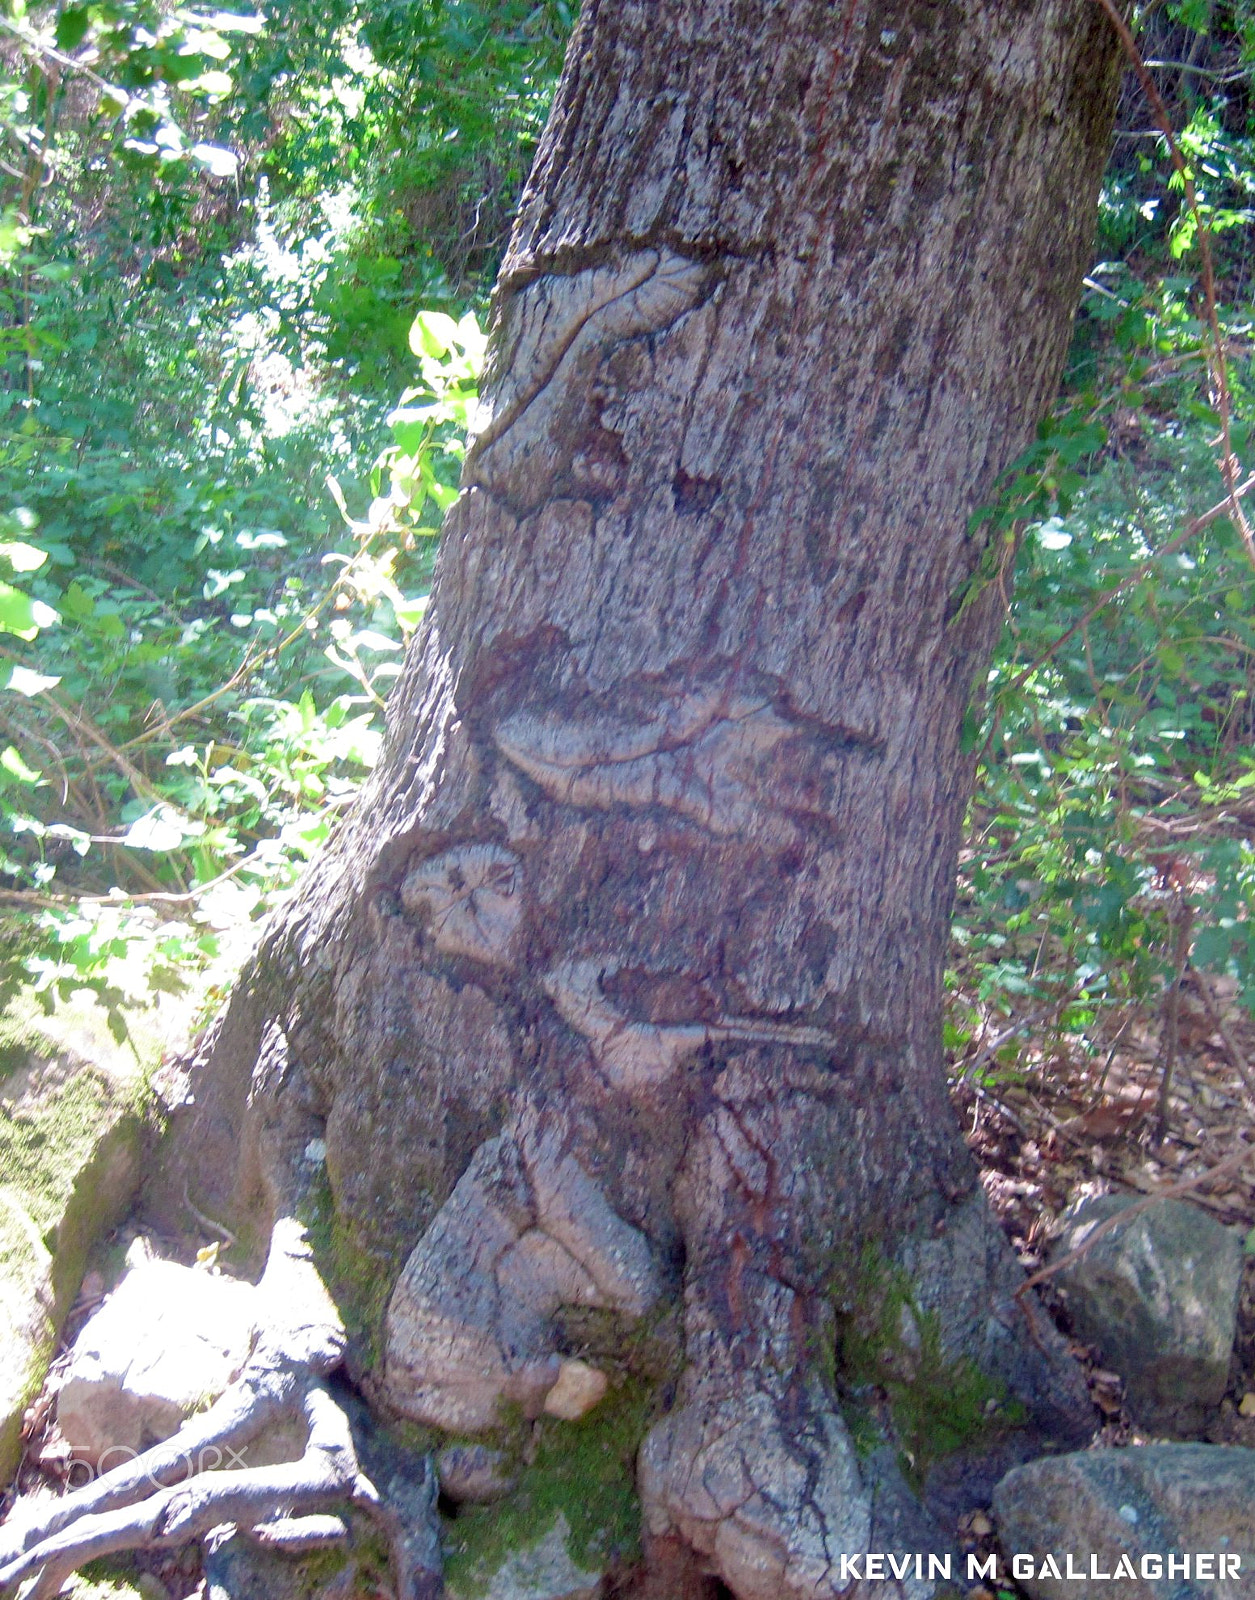 Canon PowerShot SD1200 IS (Digital IXUS 95 IS / IXY Digital 110 IS) sample photo. Tree carving o photography